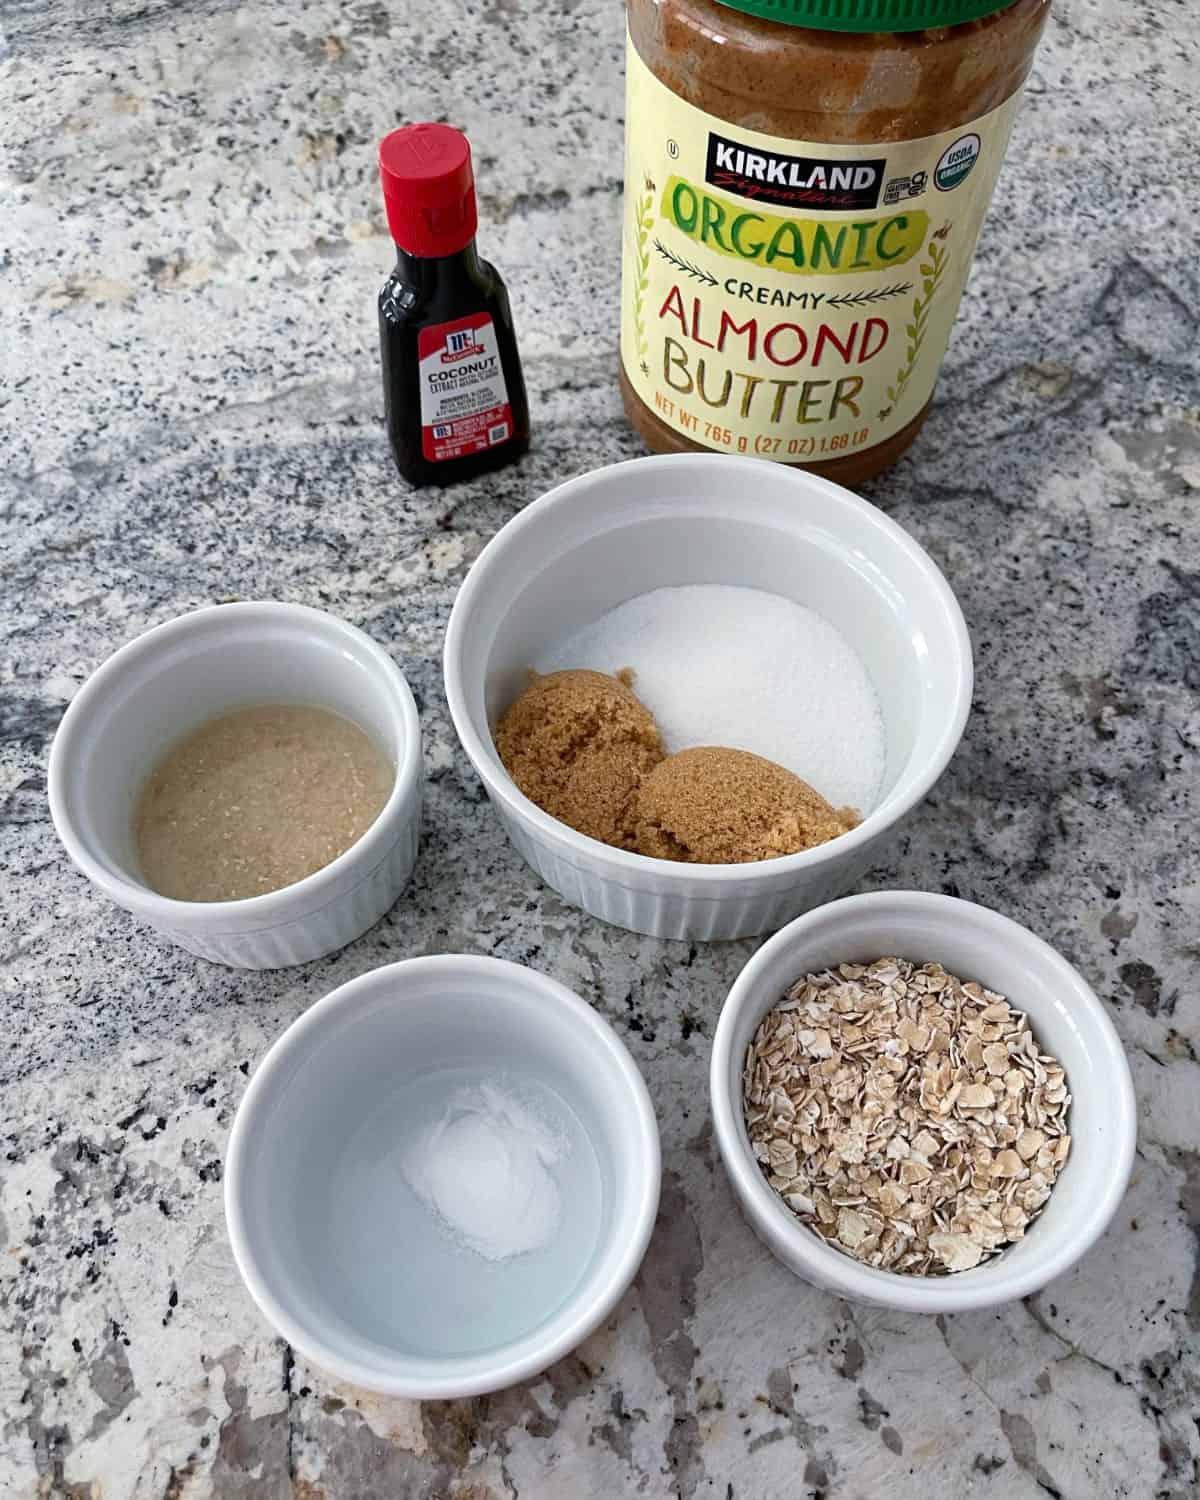 Ingredients including creamy almond butter, coconut extract, rolled oats, baking soda, Truvia Baking Blend and ground flaxseed.